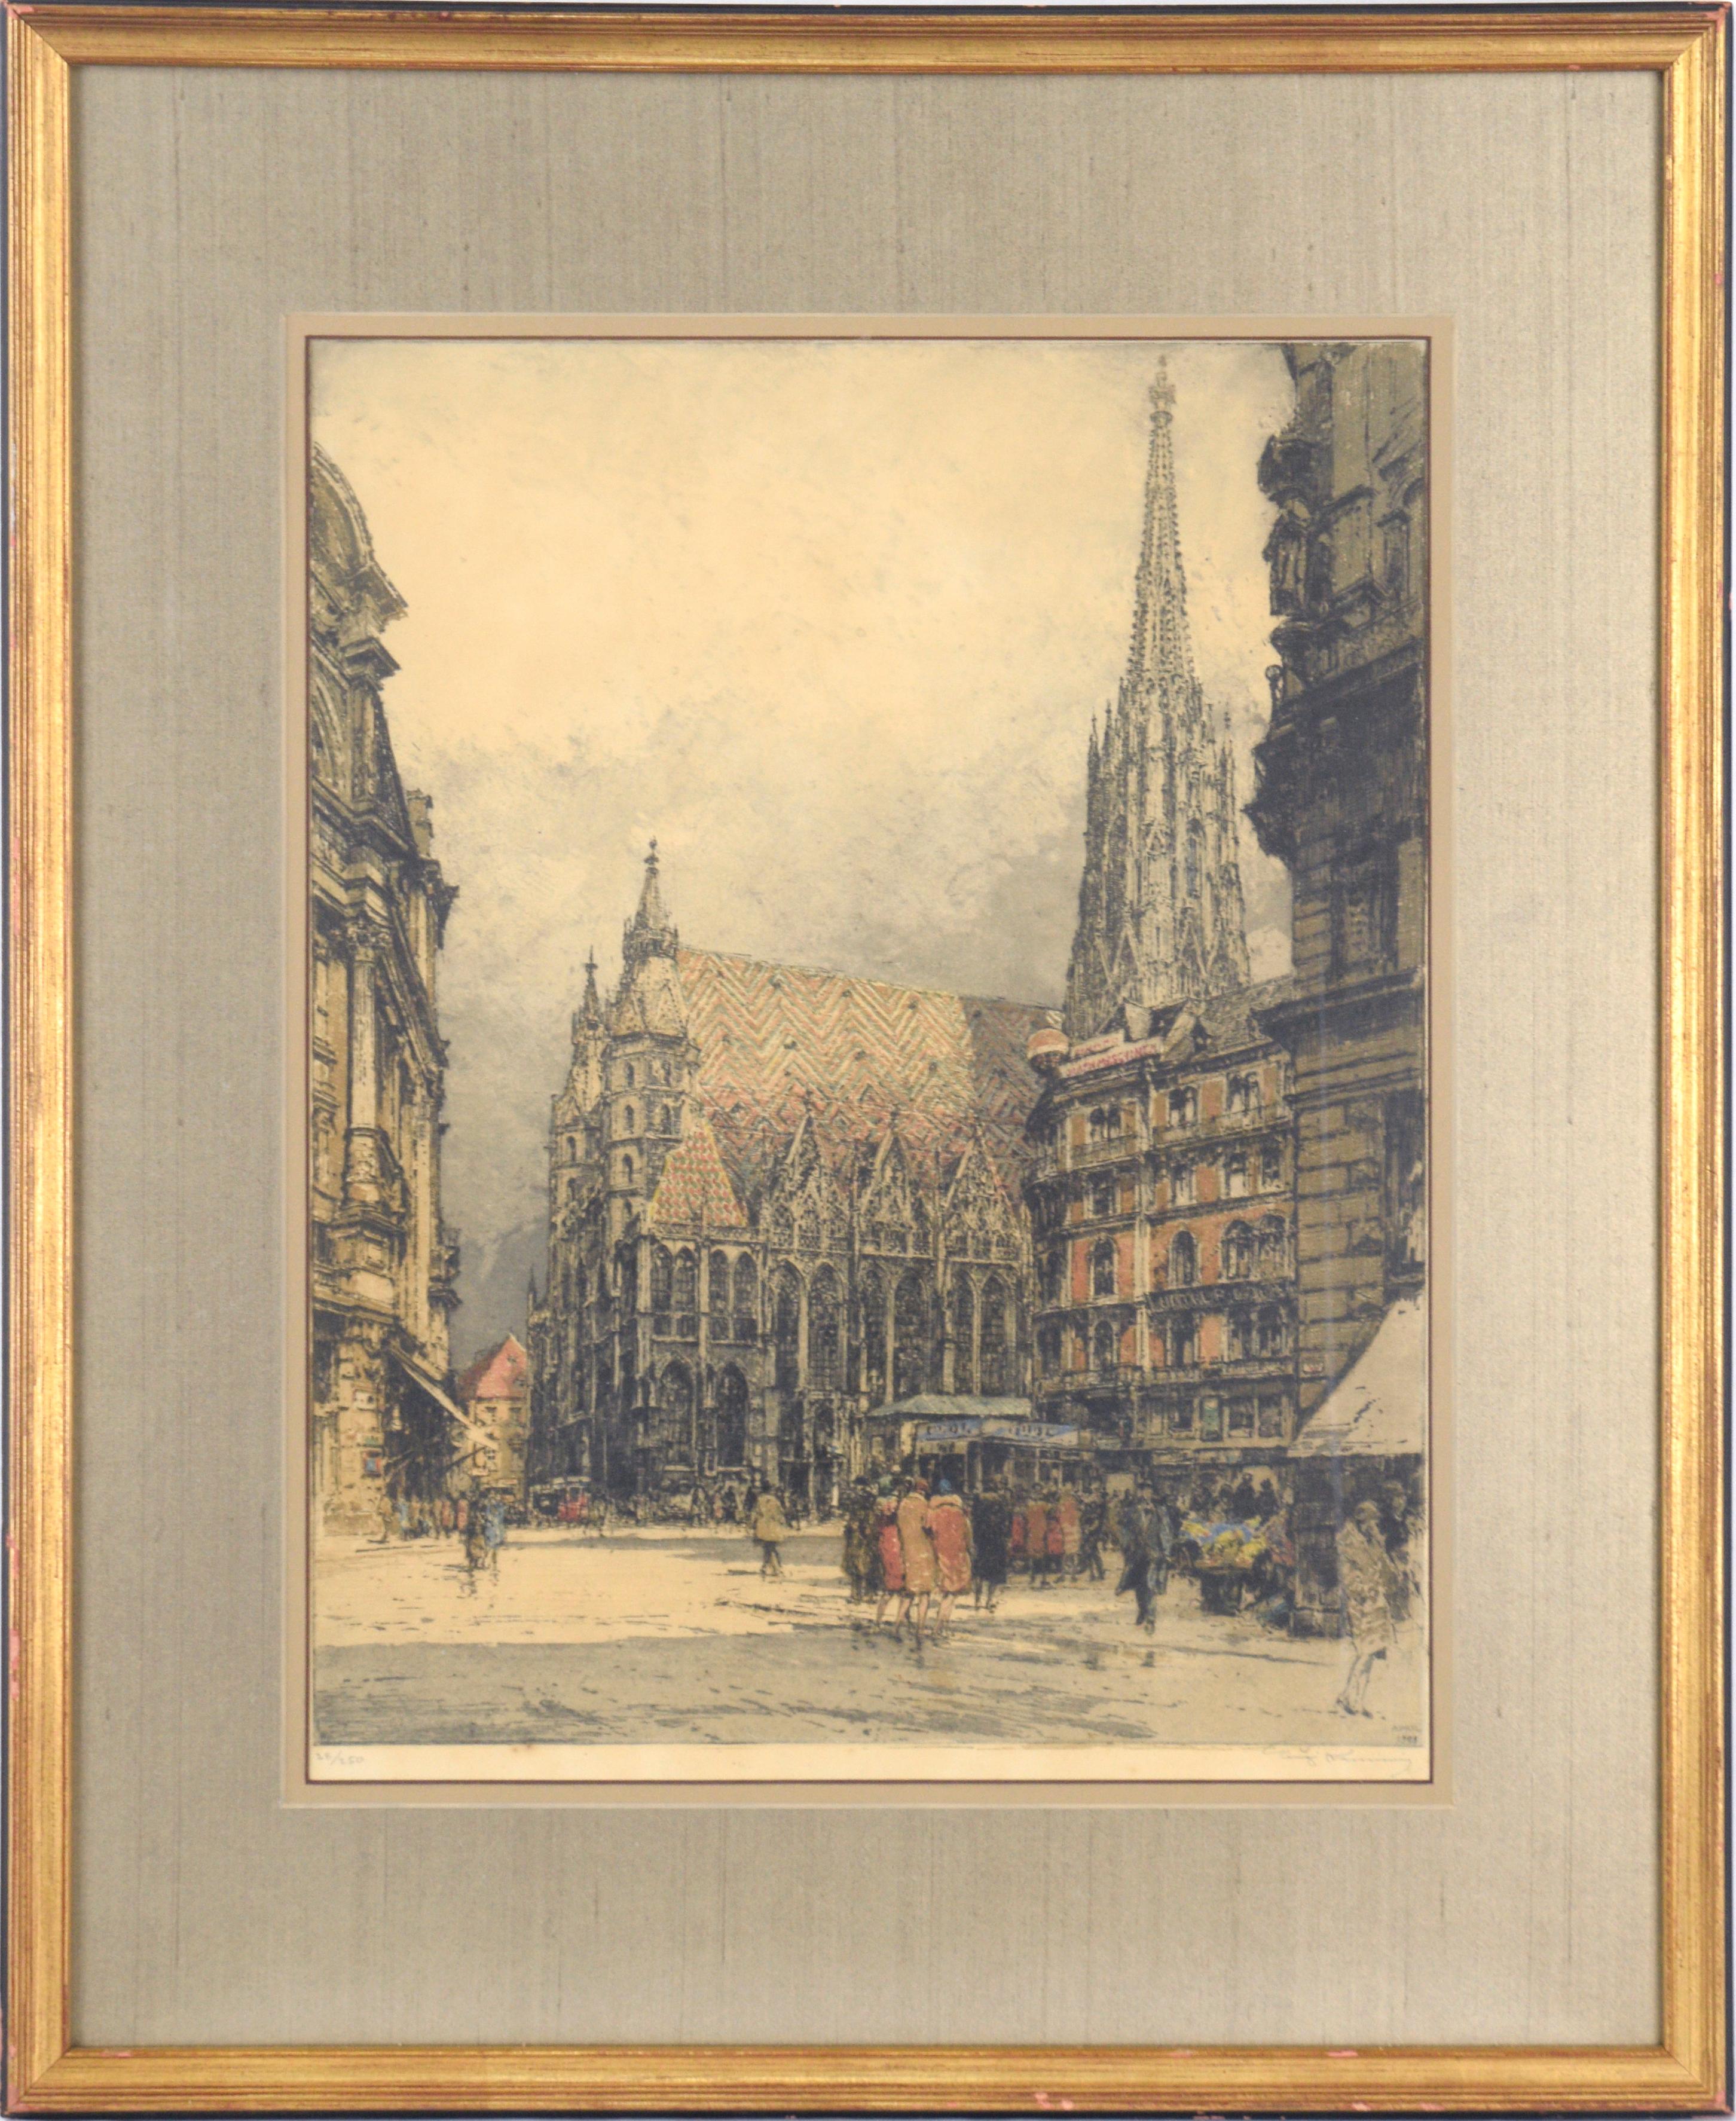 St. Stephen's Cathedral in Vienna - Hand Colored Cityscape Lithograph